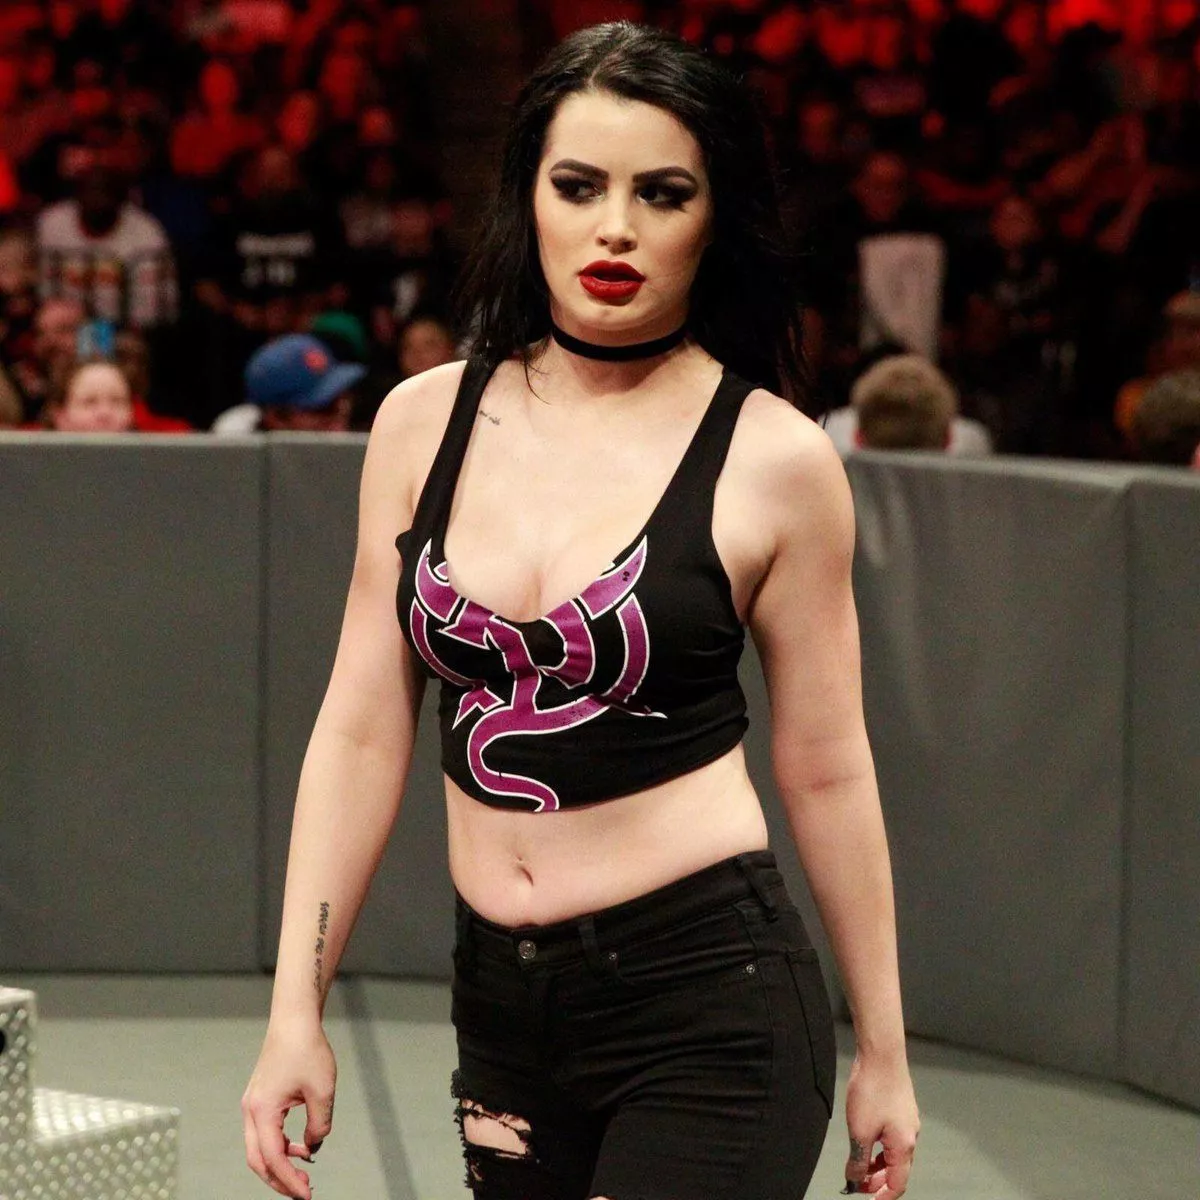 ciara lucas recommends Wwe Paige X Video